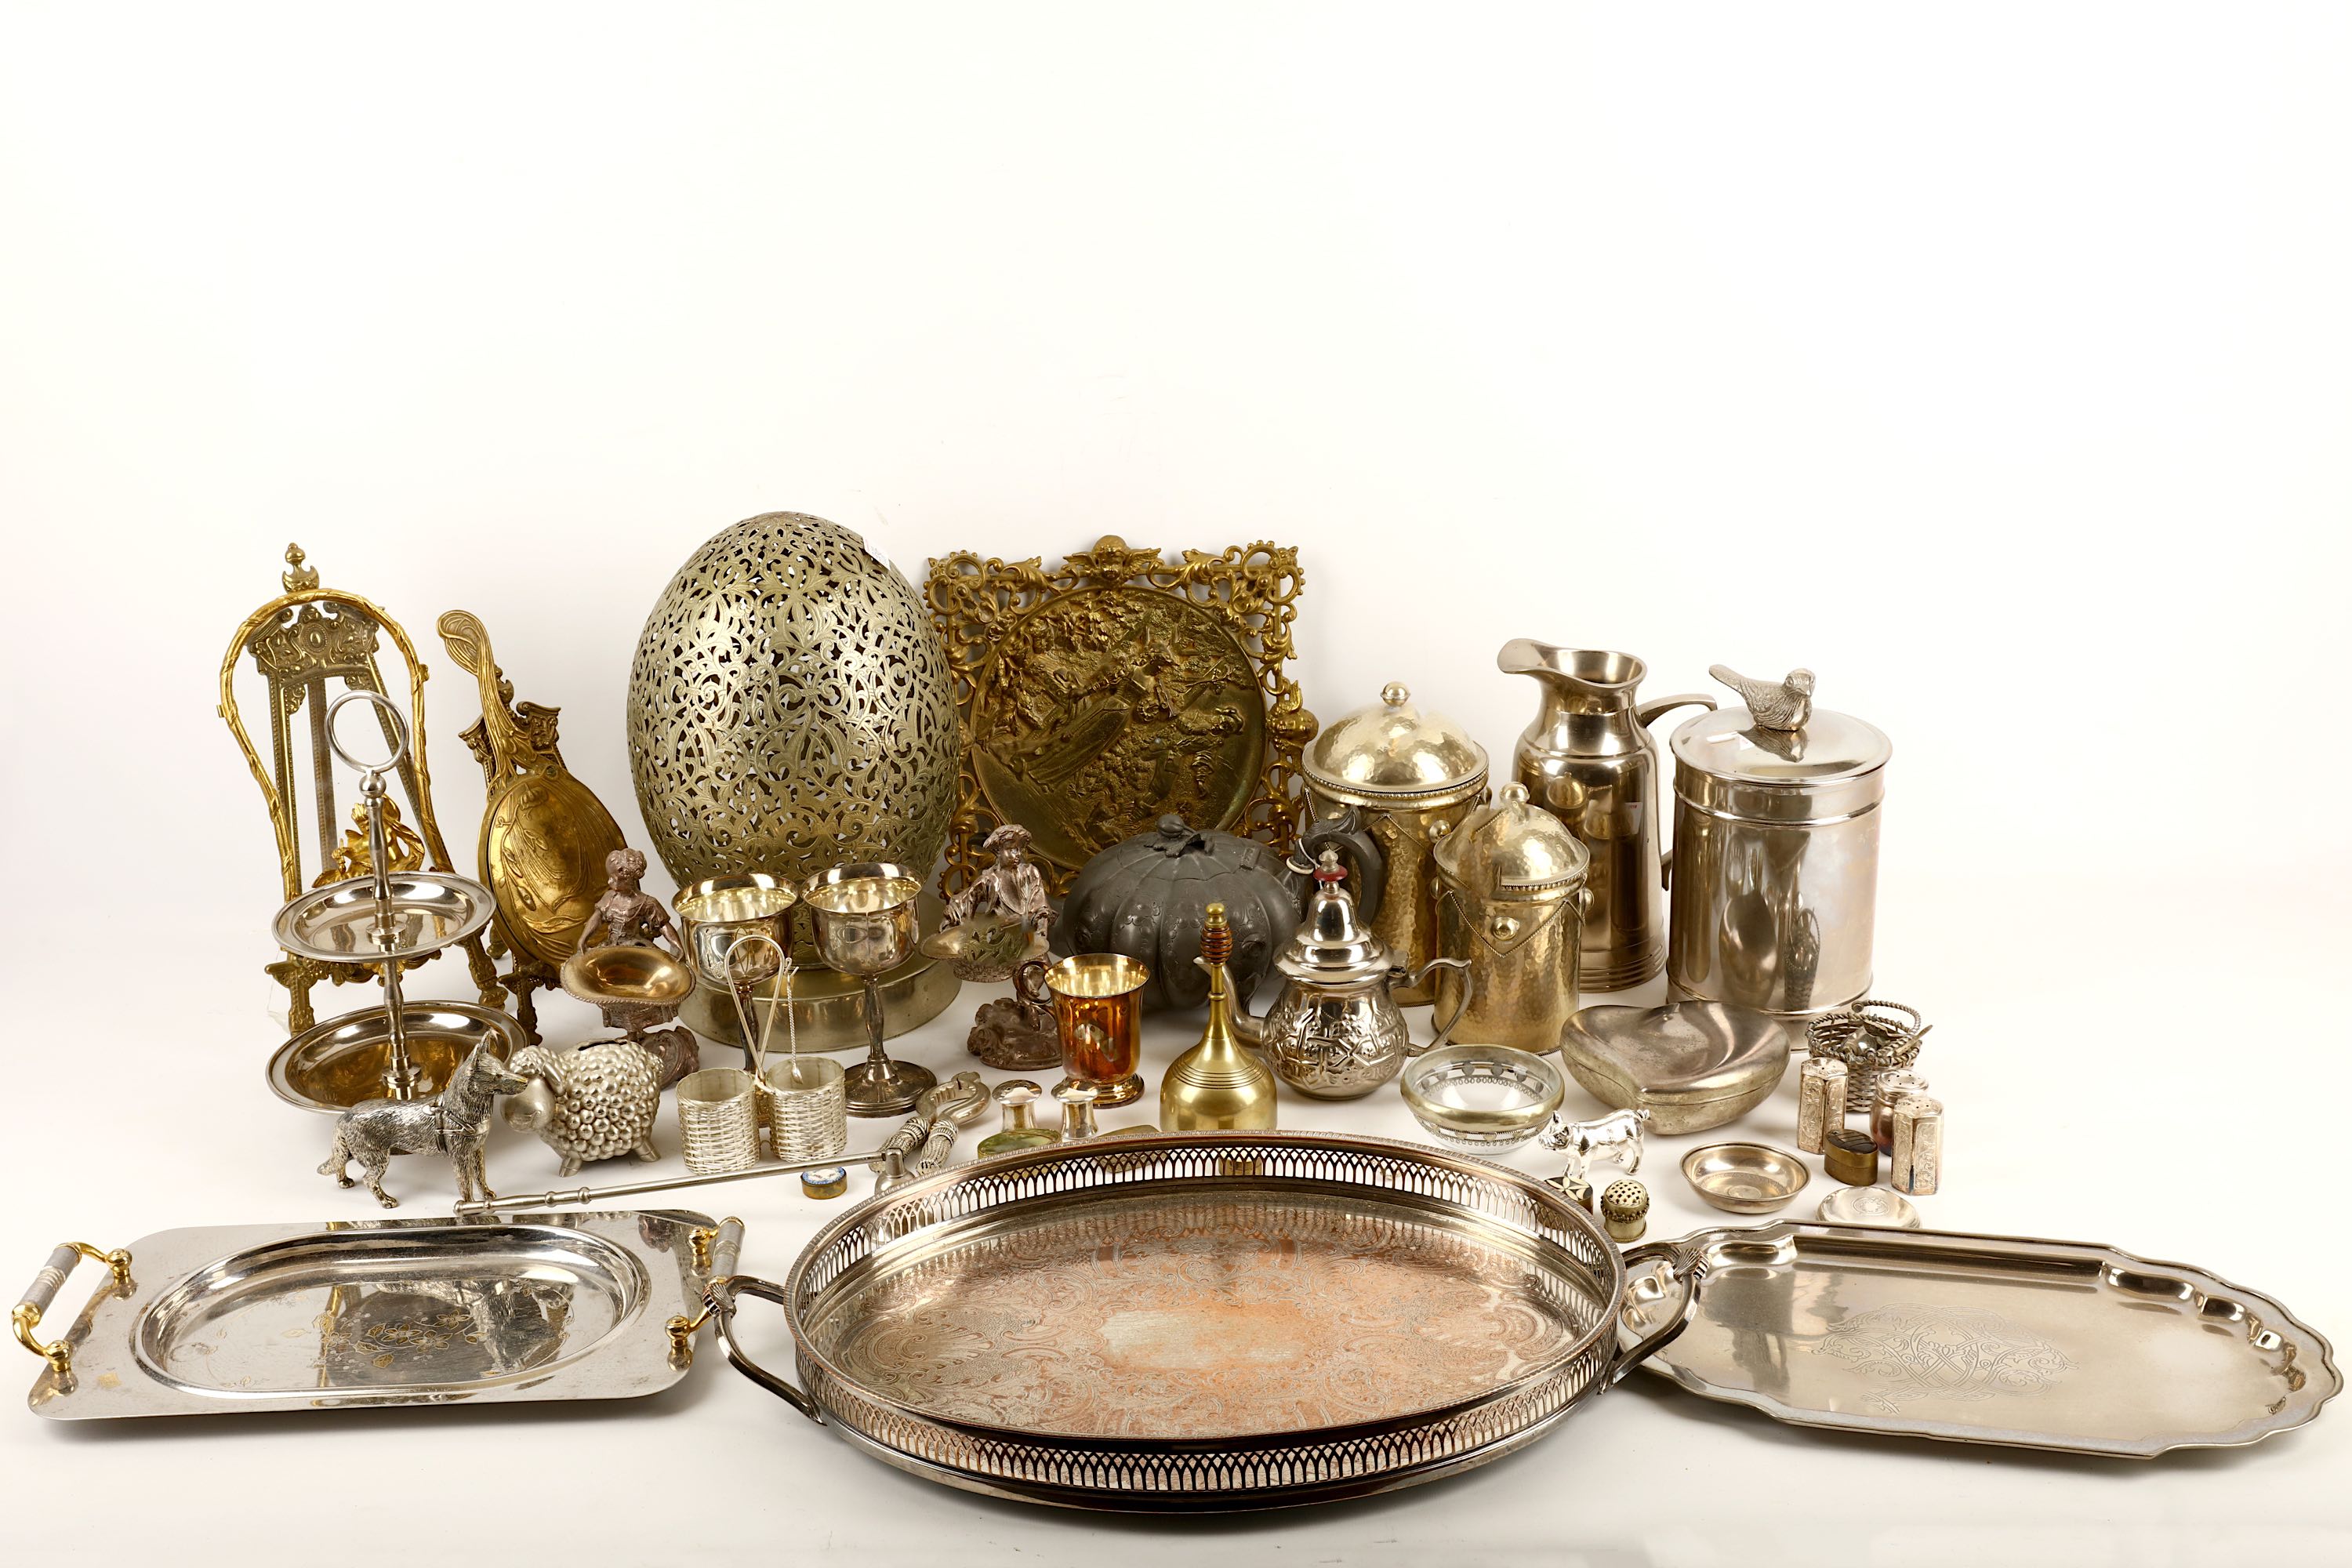 A miscellaneous selection of silver plated items, mostly mid-20th Century, to include a Sheffield